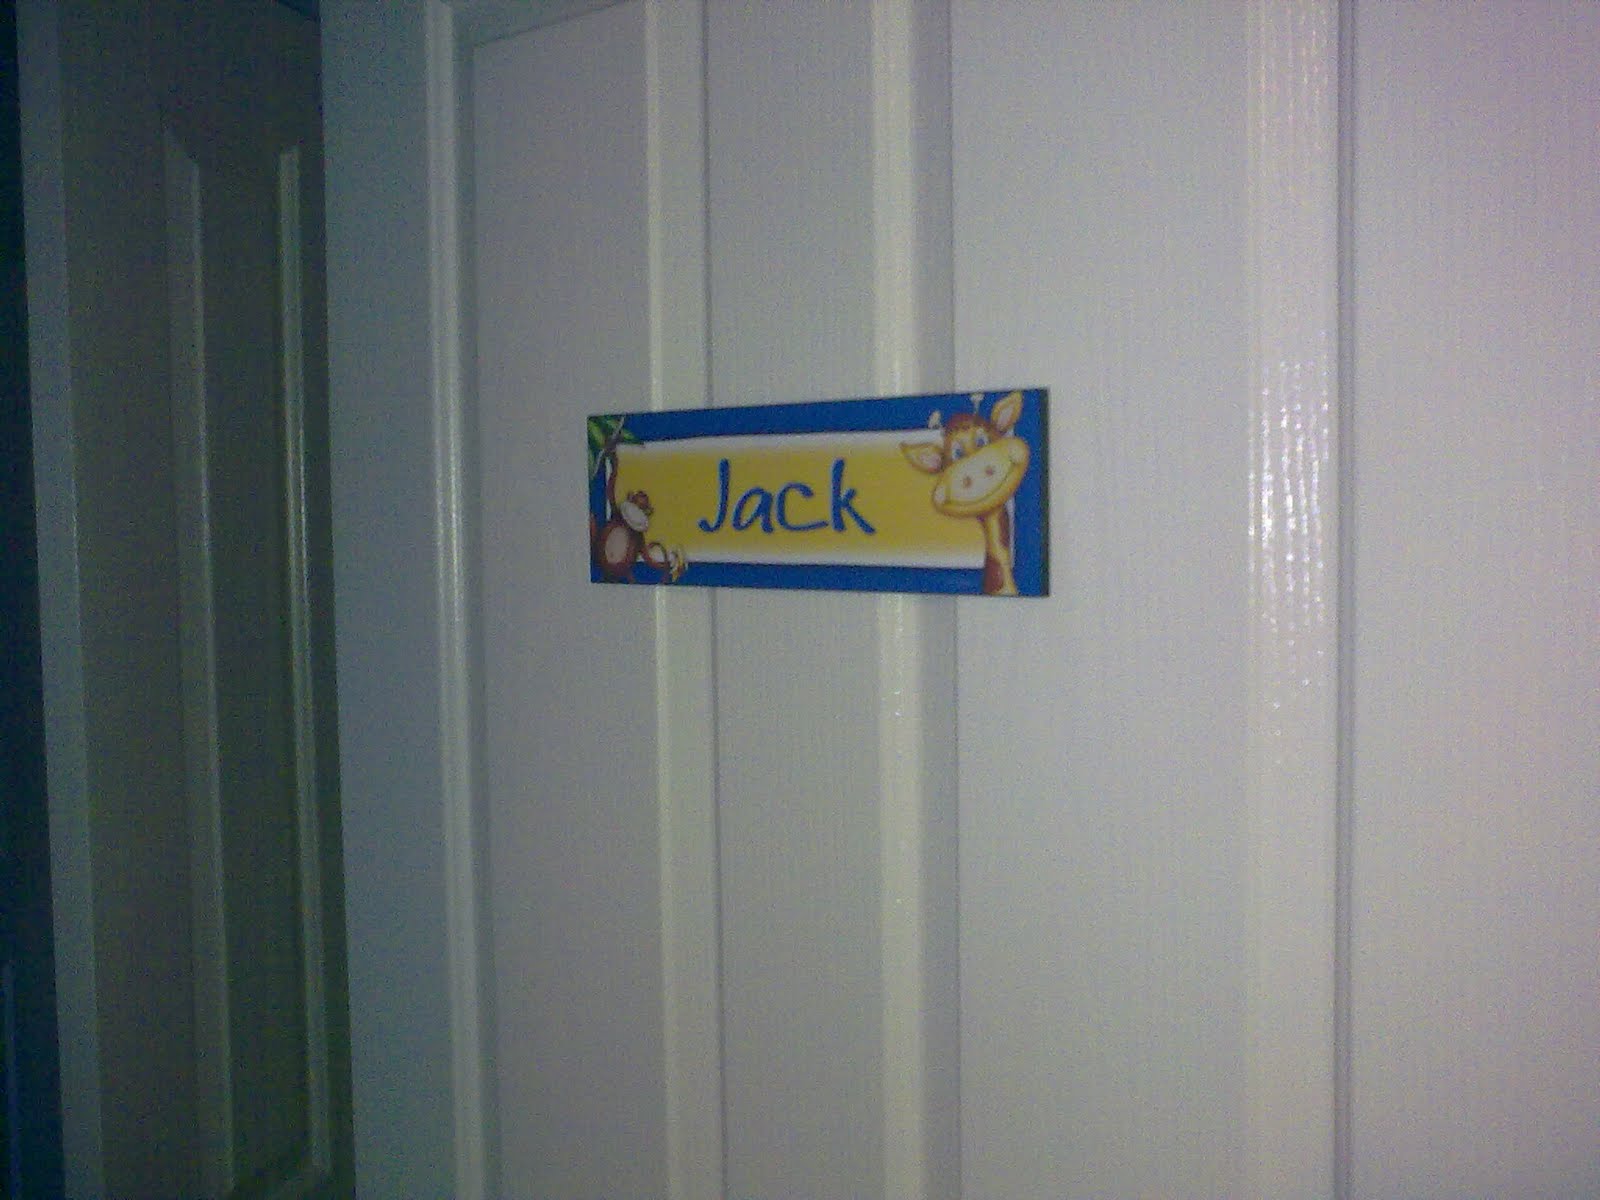 Jack Lives Here! - Keys Are Ours!